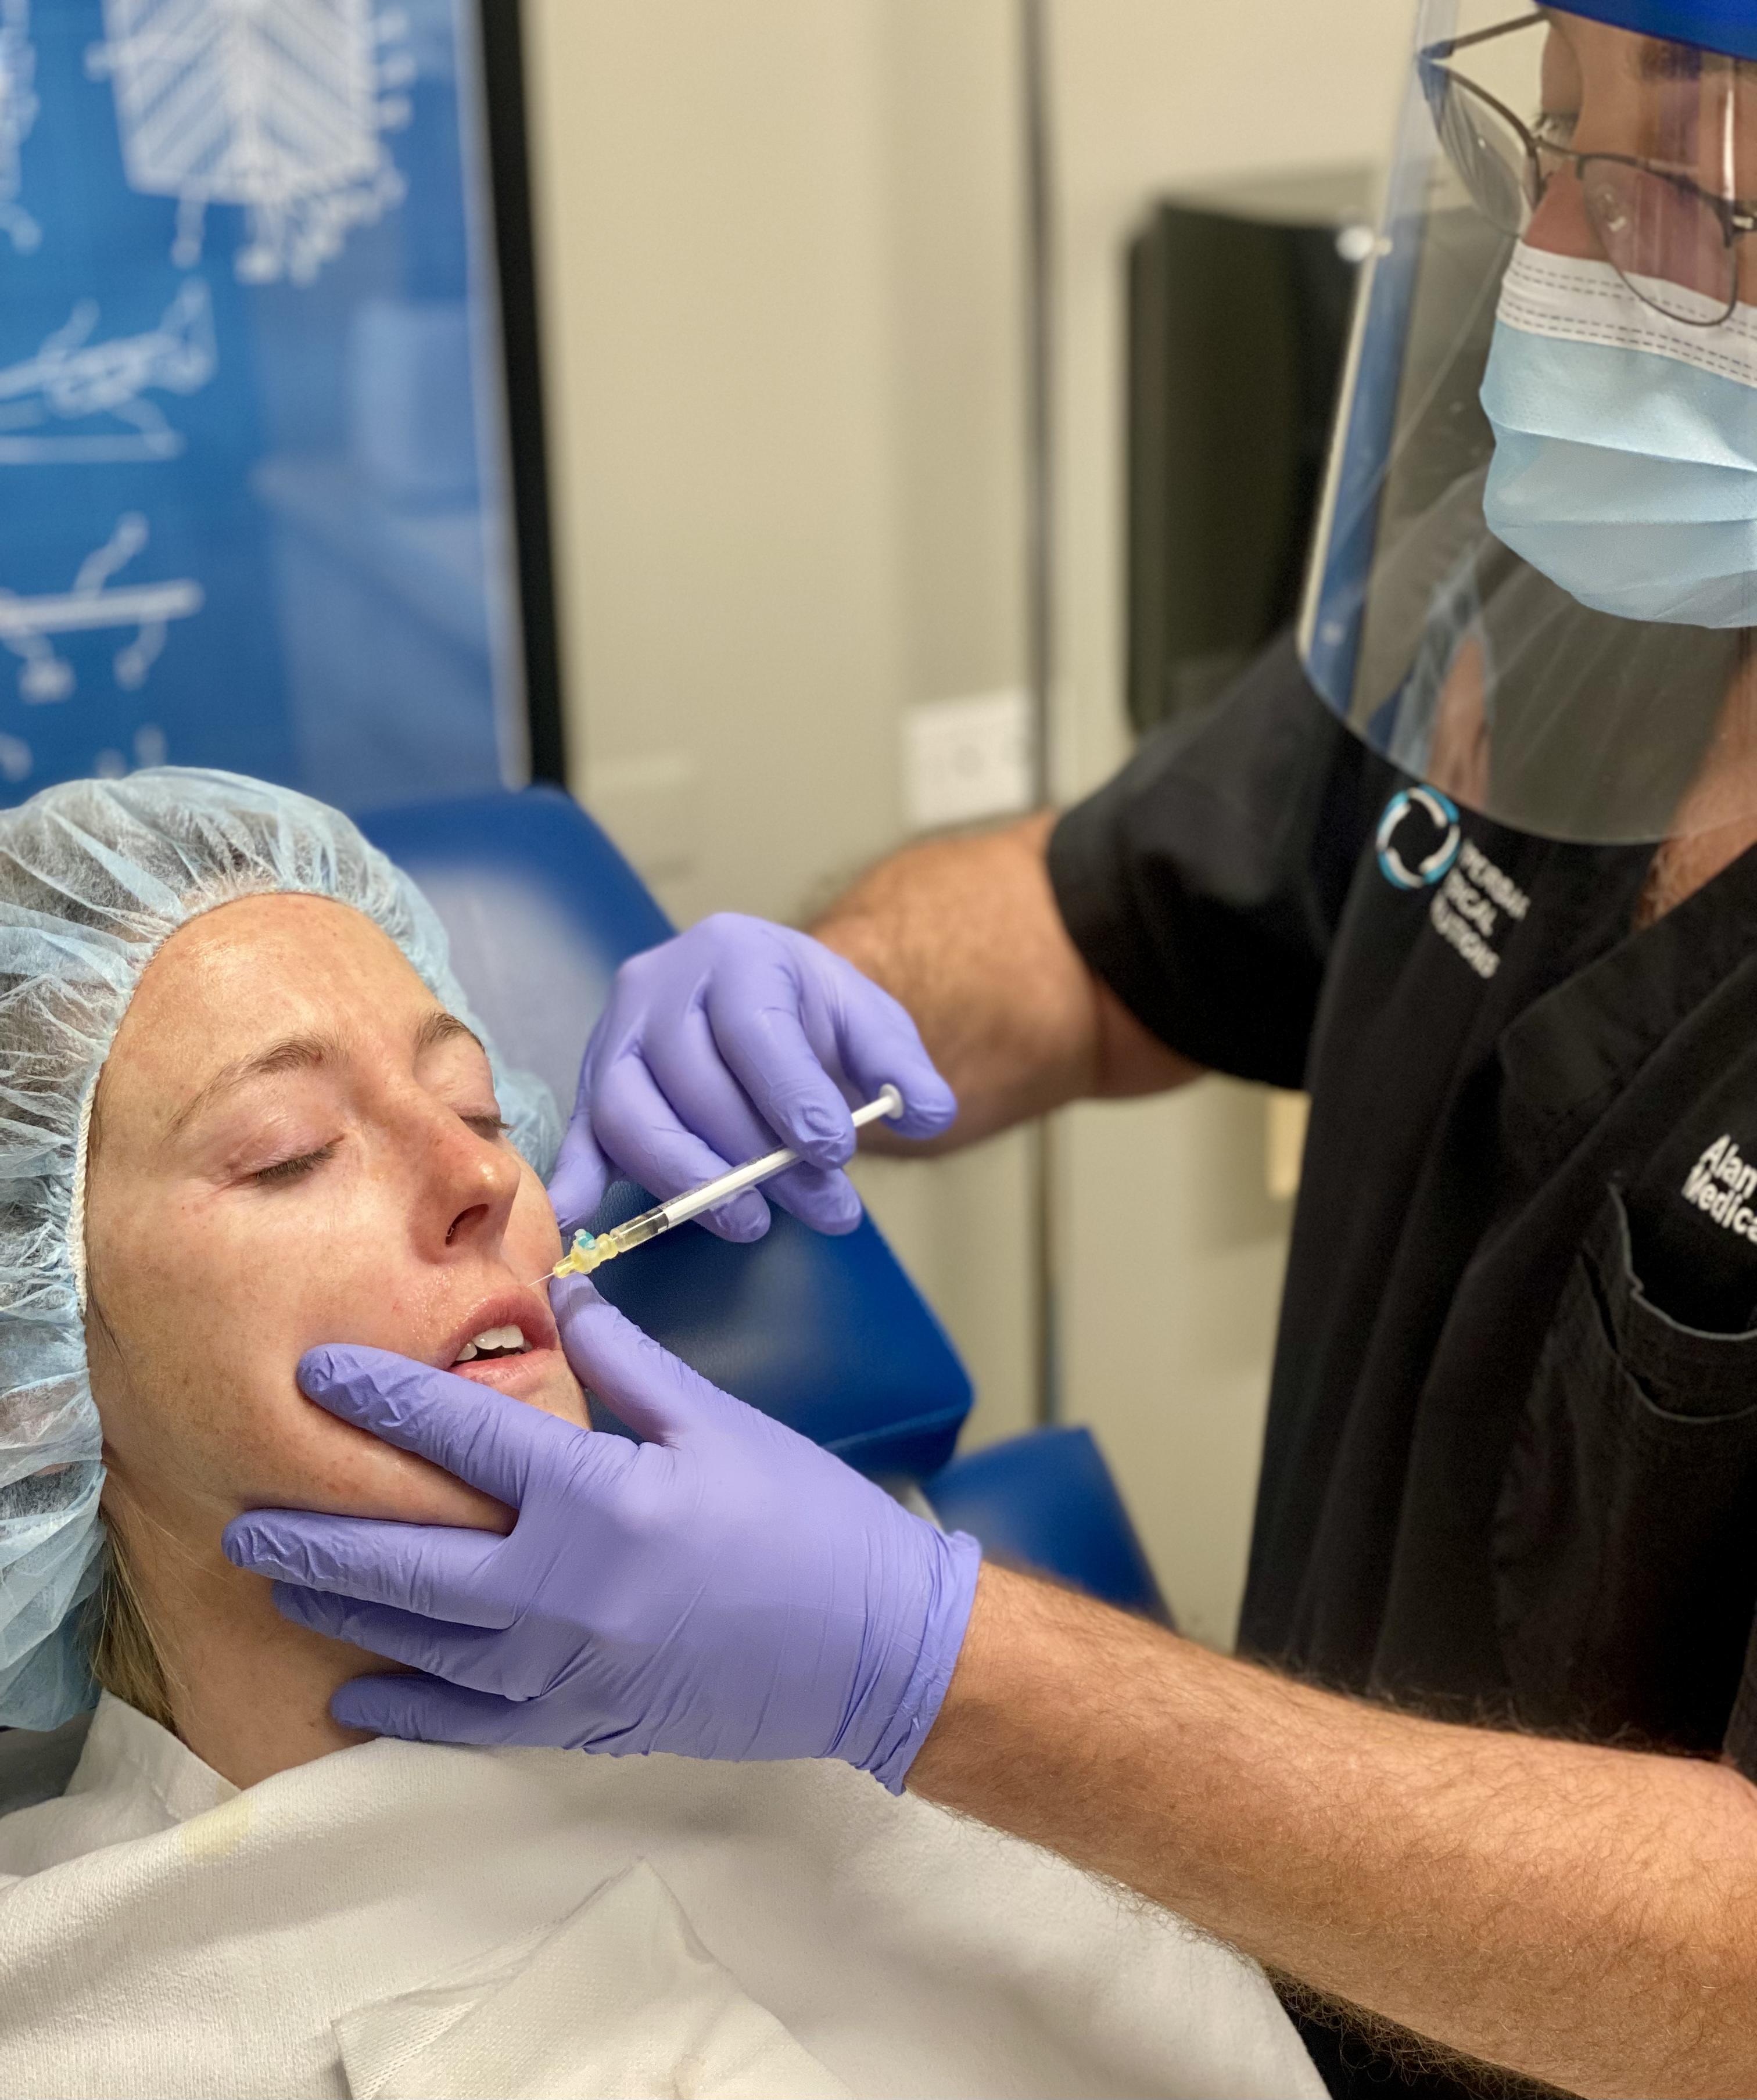 Women getting injected with PRP for anti-aging benefits.